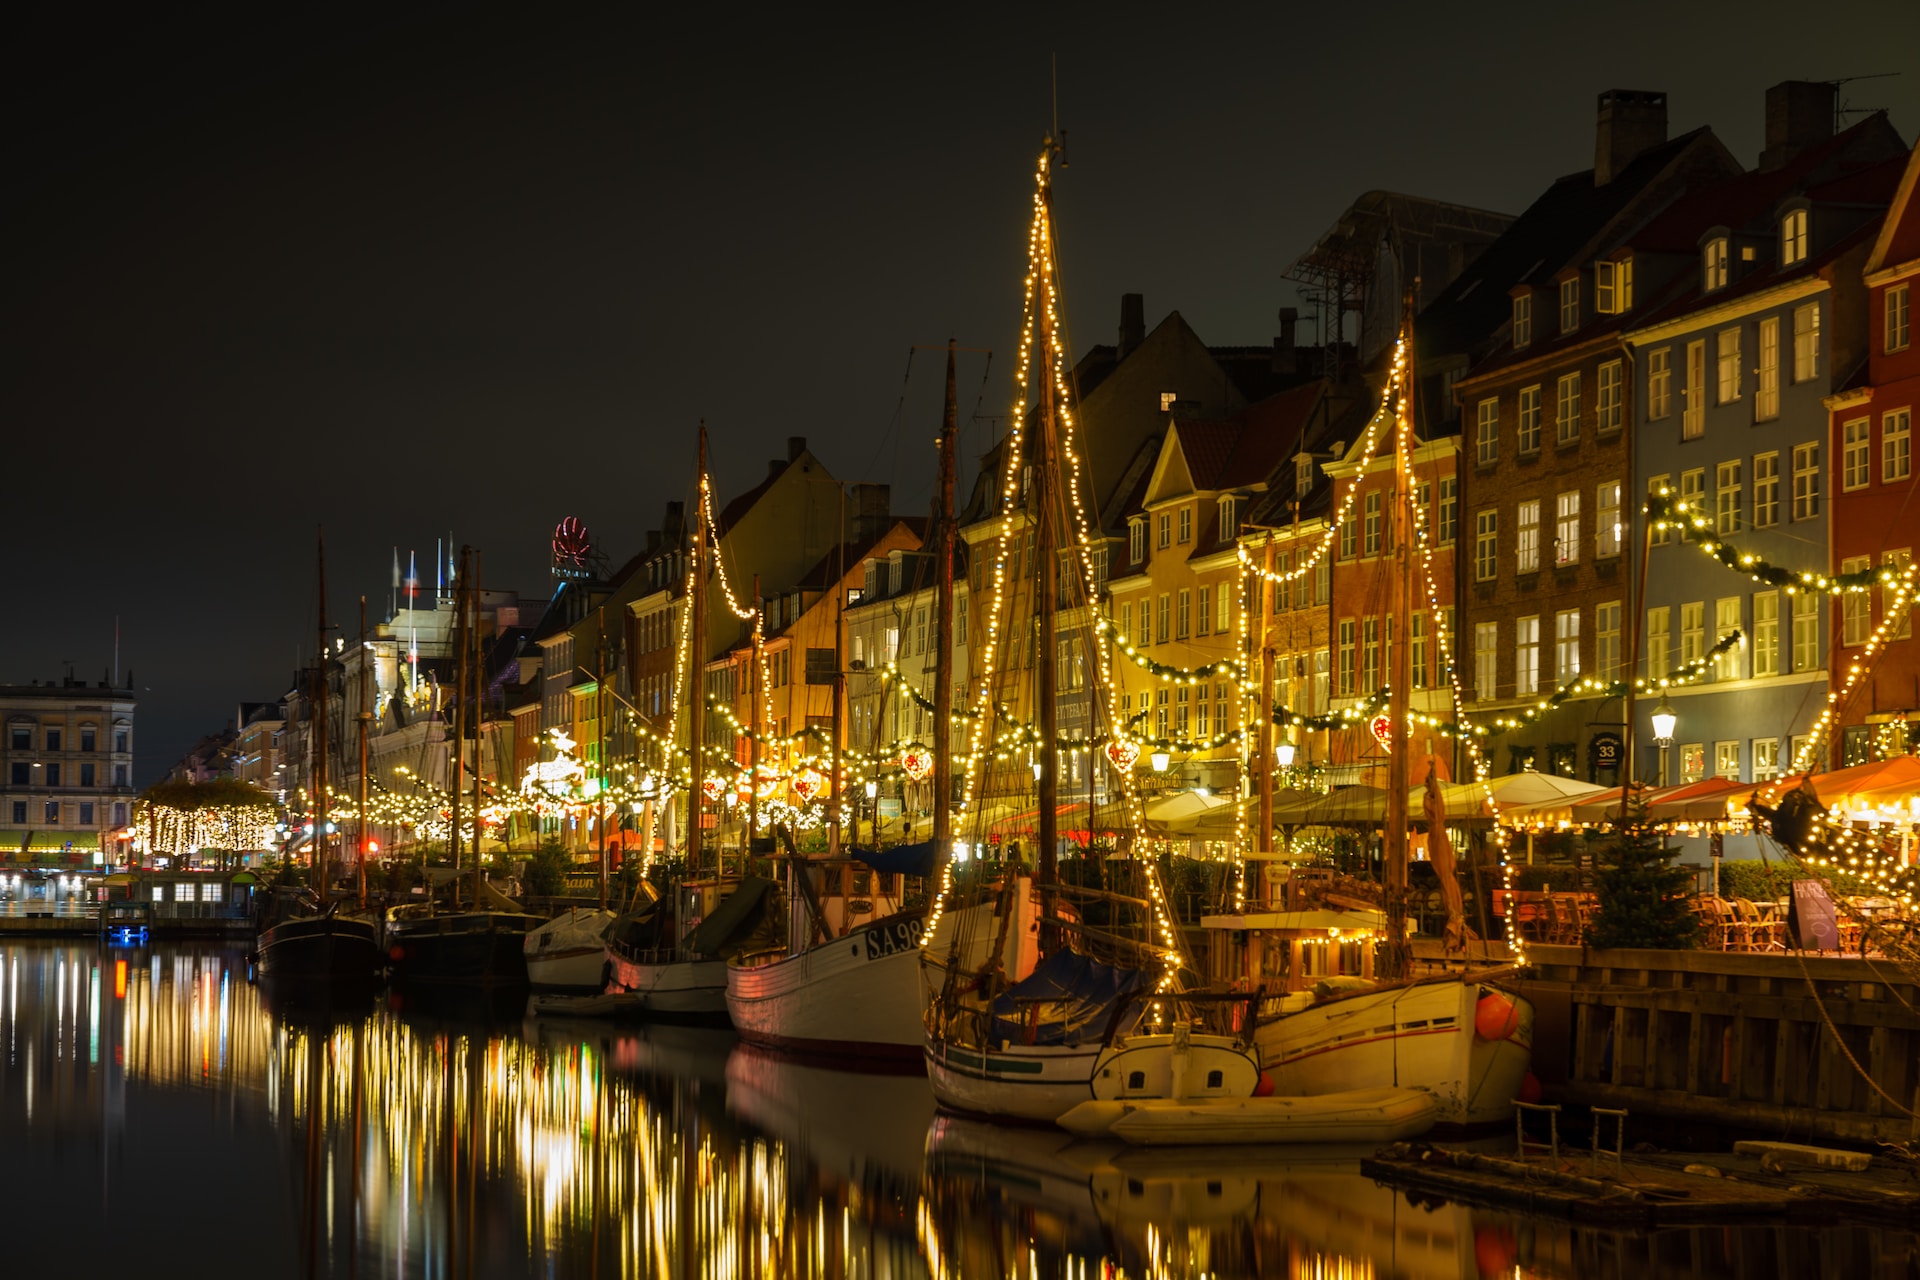 The Nyhavn district